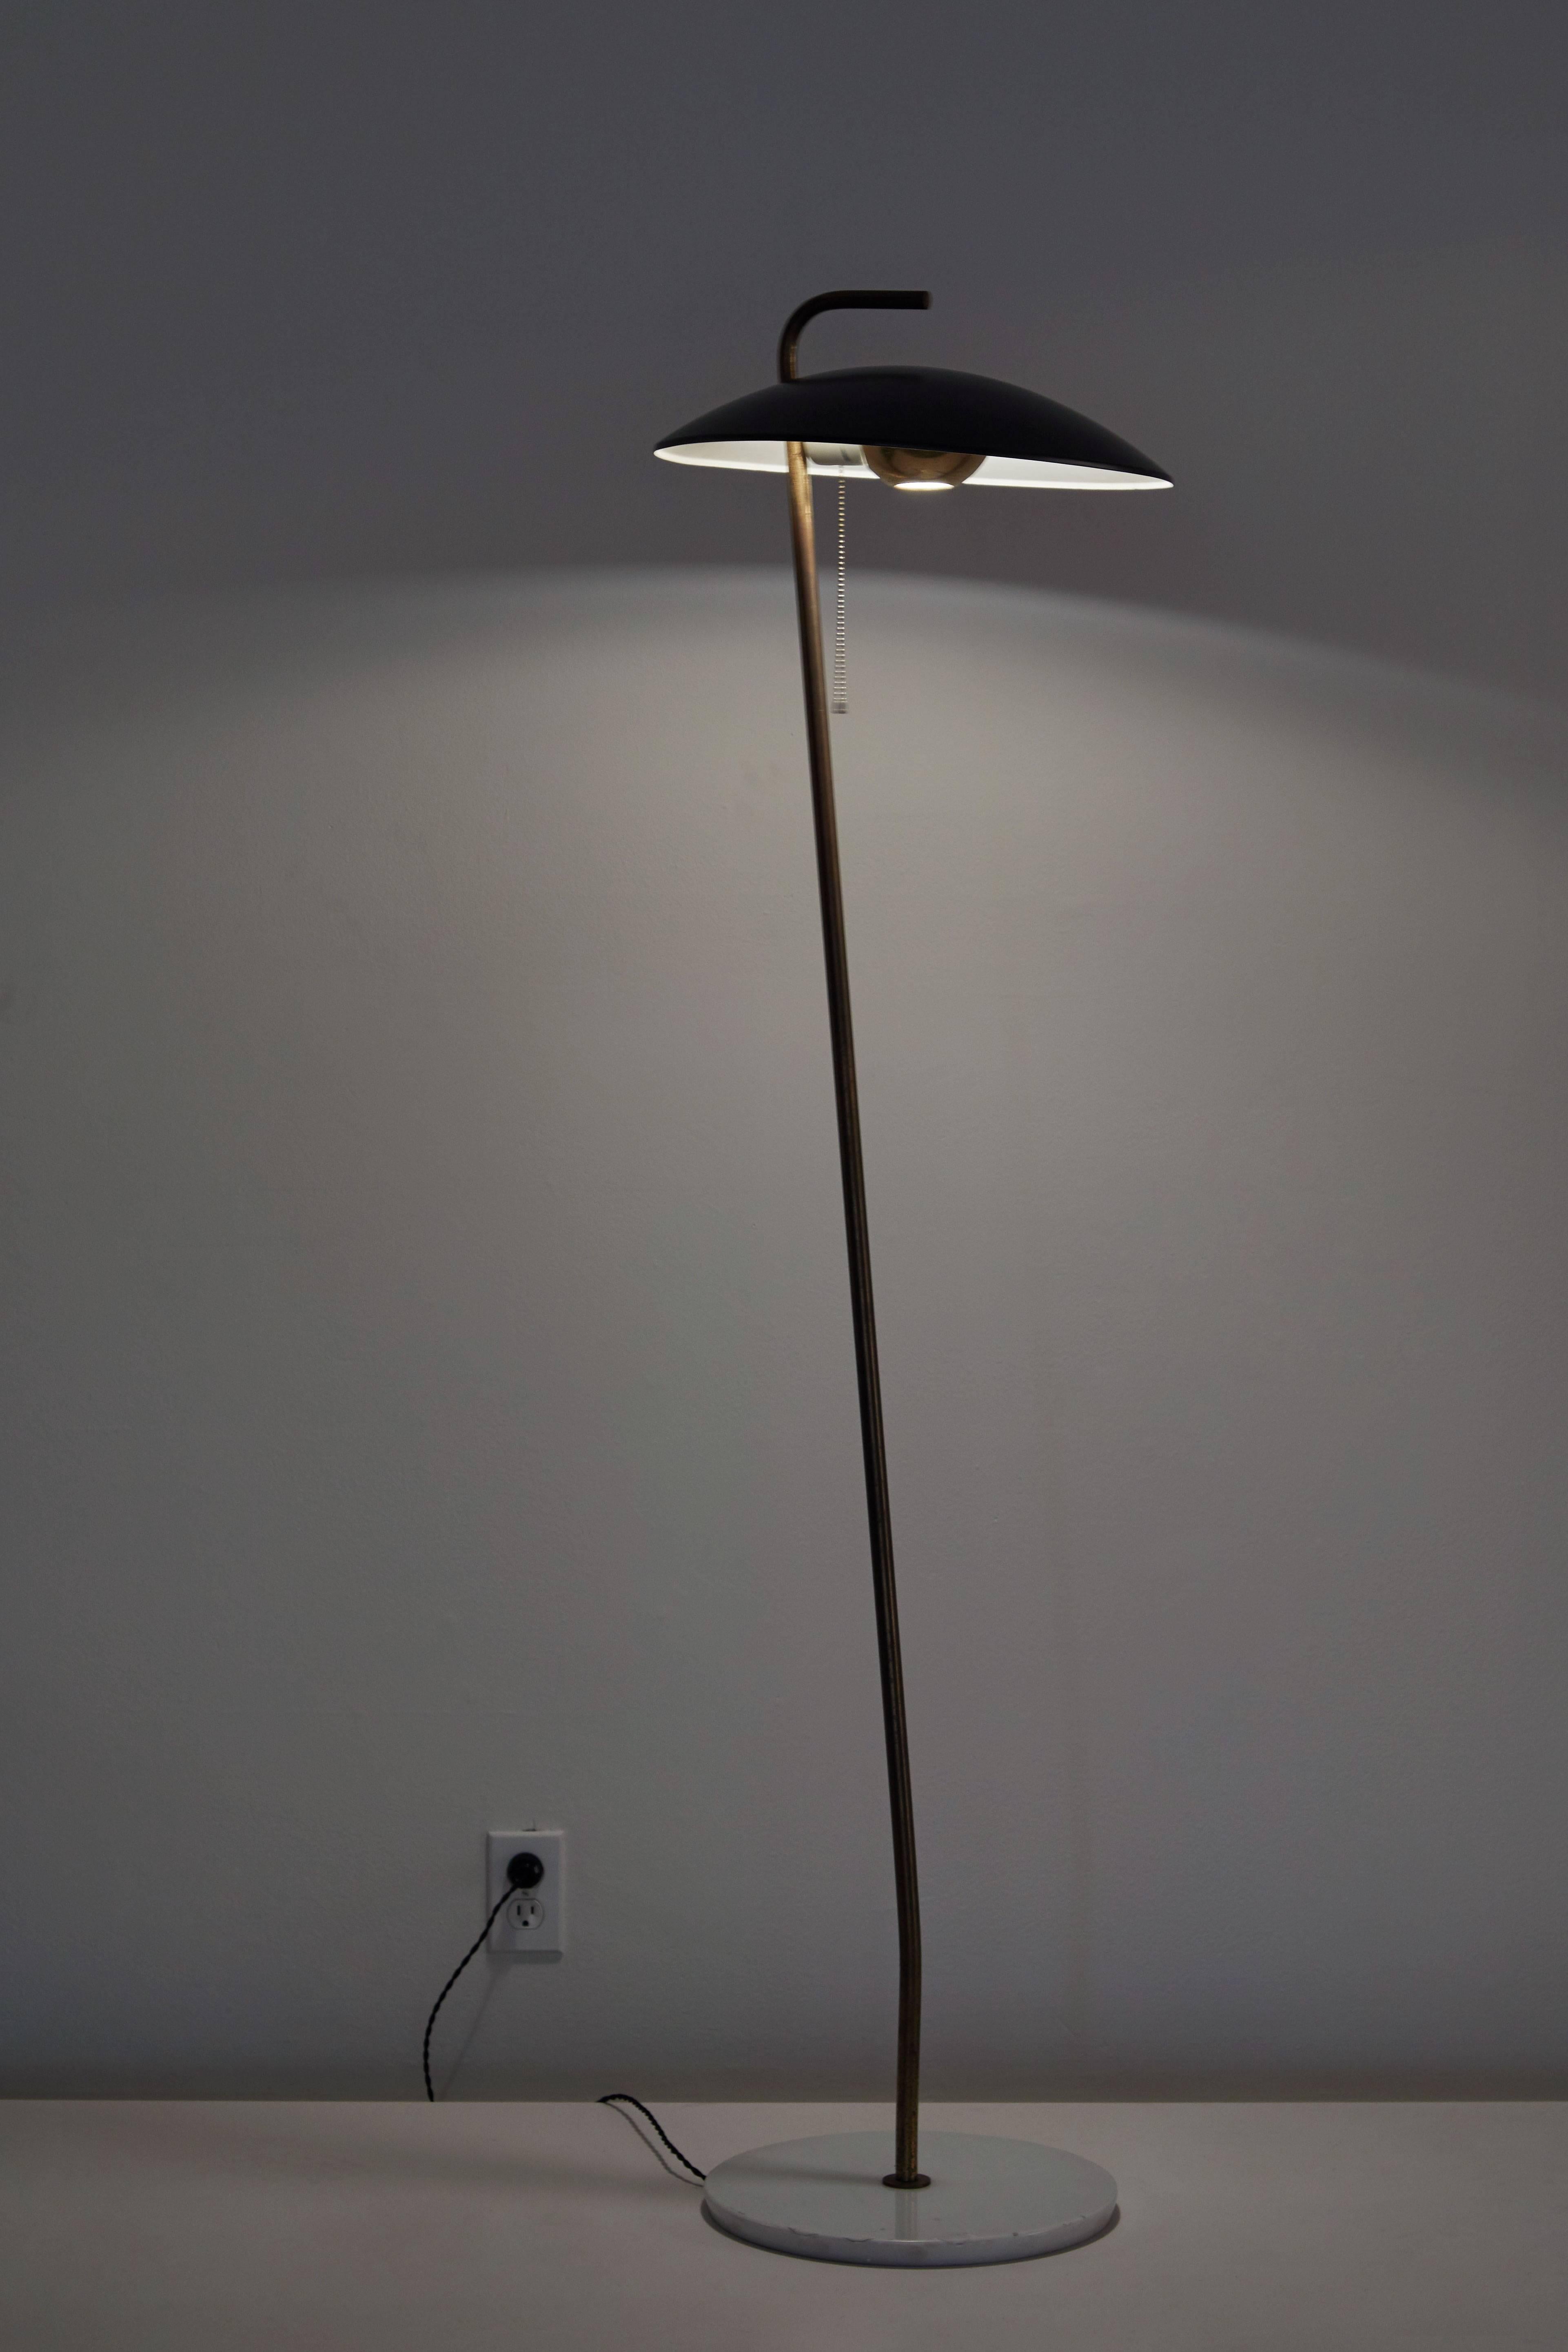 Rare floor lamp by Stilnovo designed in Italy, circa 1950s. Metal shade and brass stem with marble base. Takes one E27 100w maximum bulb. Rewired with French twist silk cord.